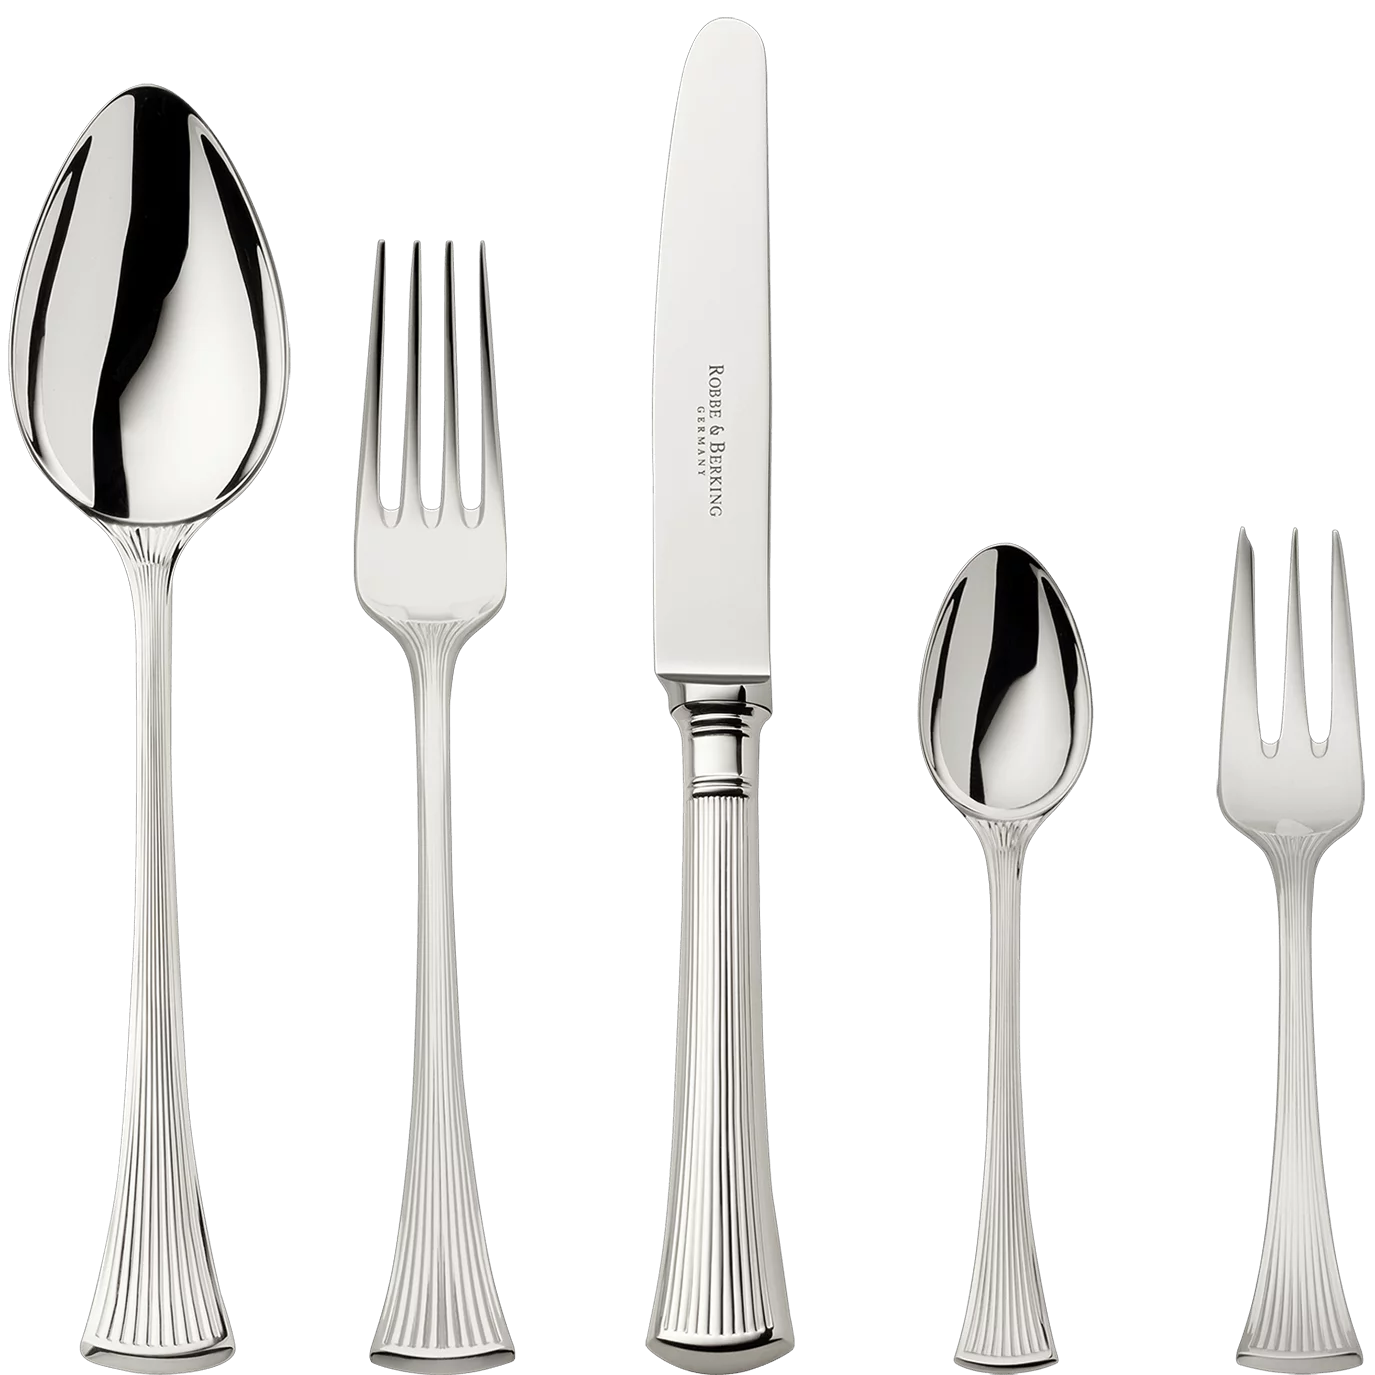 Avenue 5-piece place setting (150g massive silverplated)